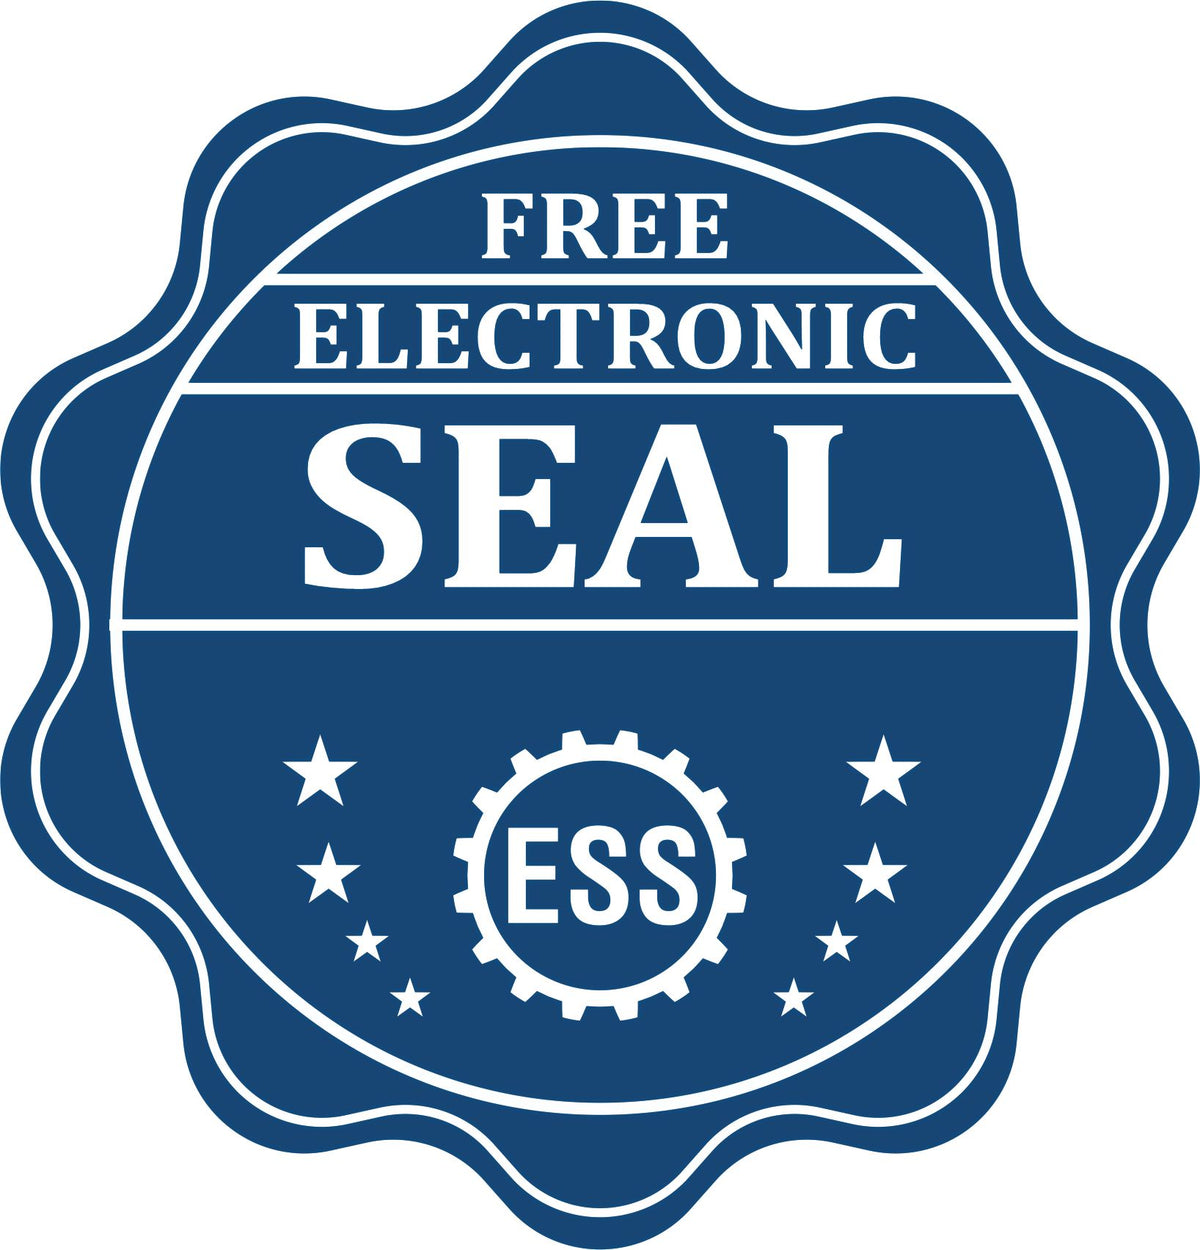 A badge showing a free electronic seal for the Slim Pre-Inked Rectangular Notary Stamp for Oregon with stars and the ESS gear on the emblem.